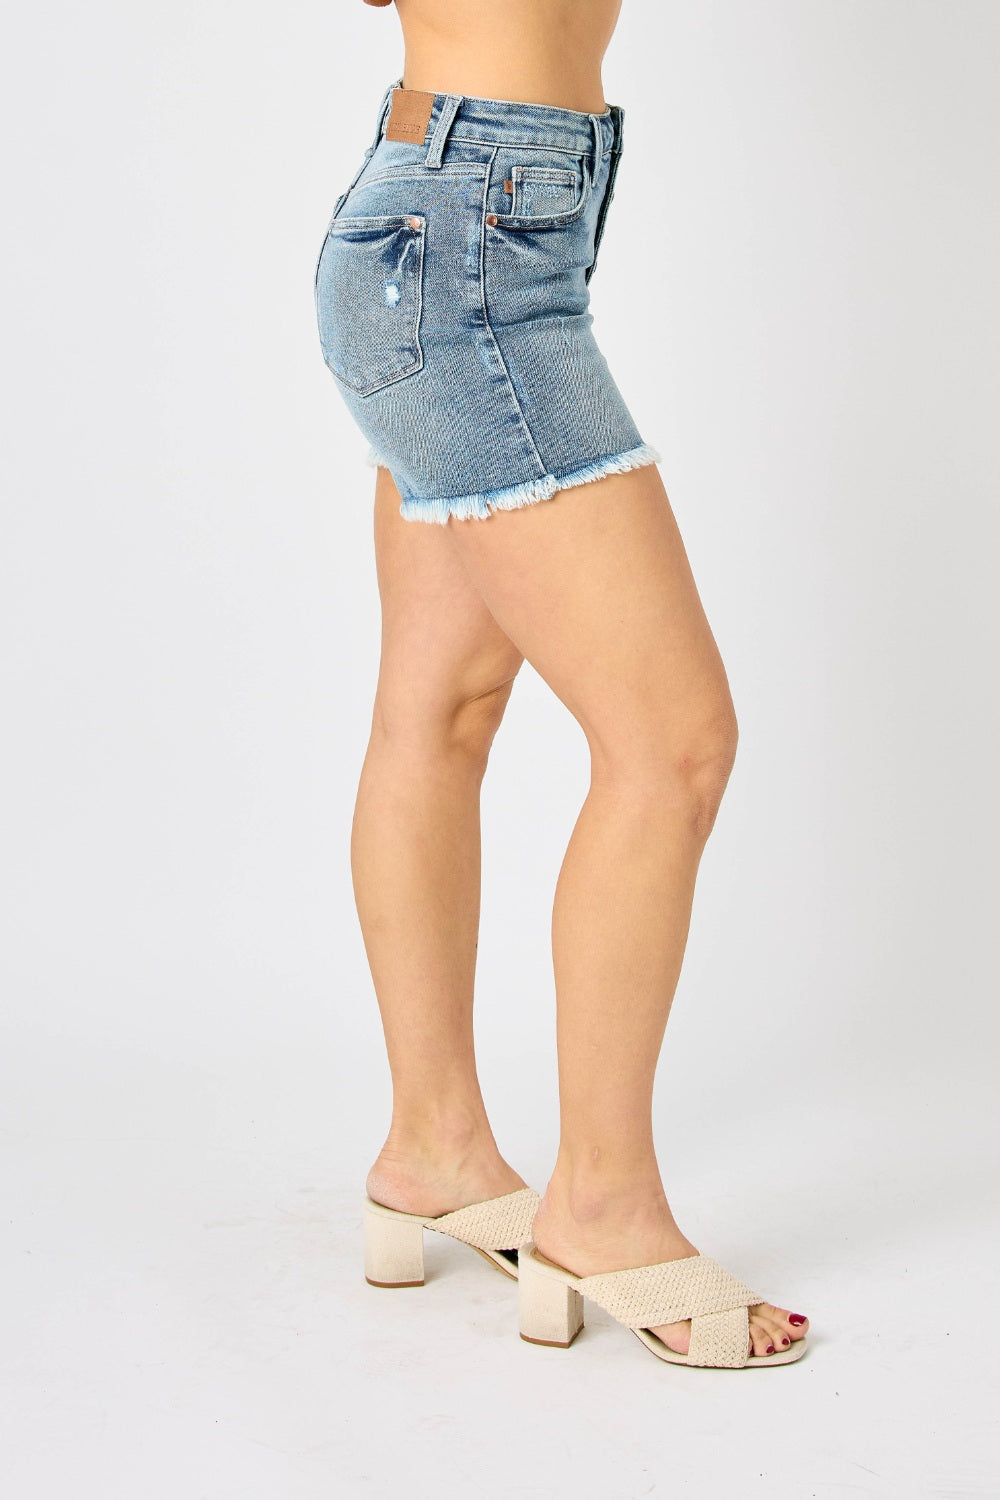 Button Fly Raw Hem Denim Shorts are a trendy and stylish choice for any casual outfit. With their button fly closure and raw hem detailing, these shorts offer a unique and edgy look. Made from high-quality denim, they are both durable and comfortable to wear.  S - 3X